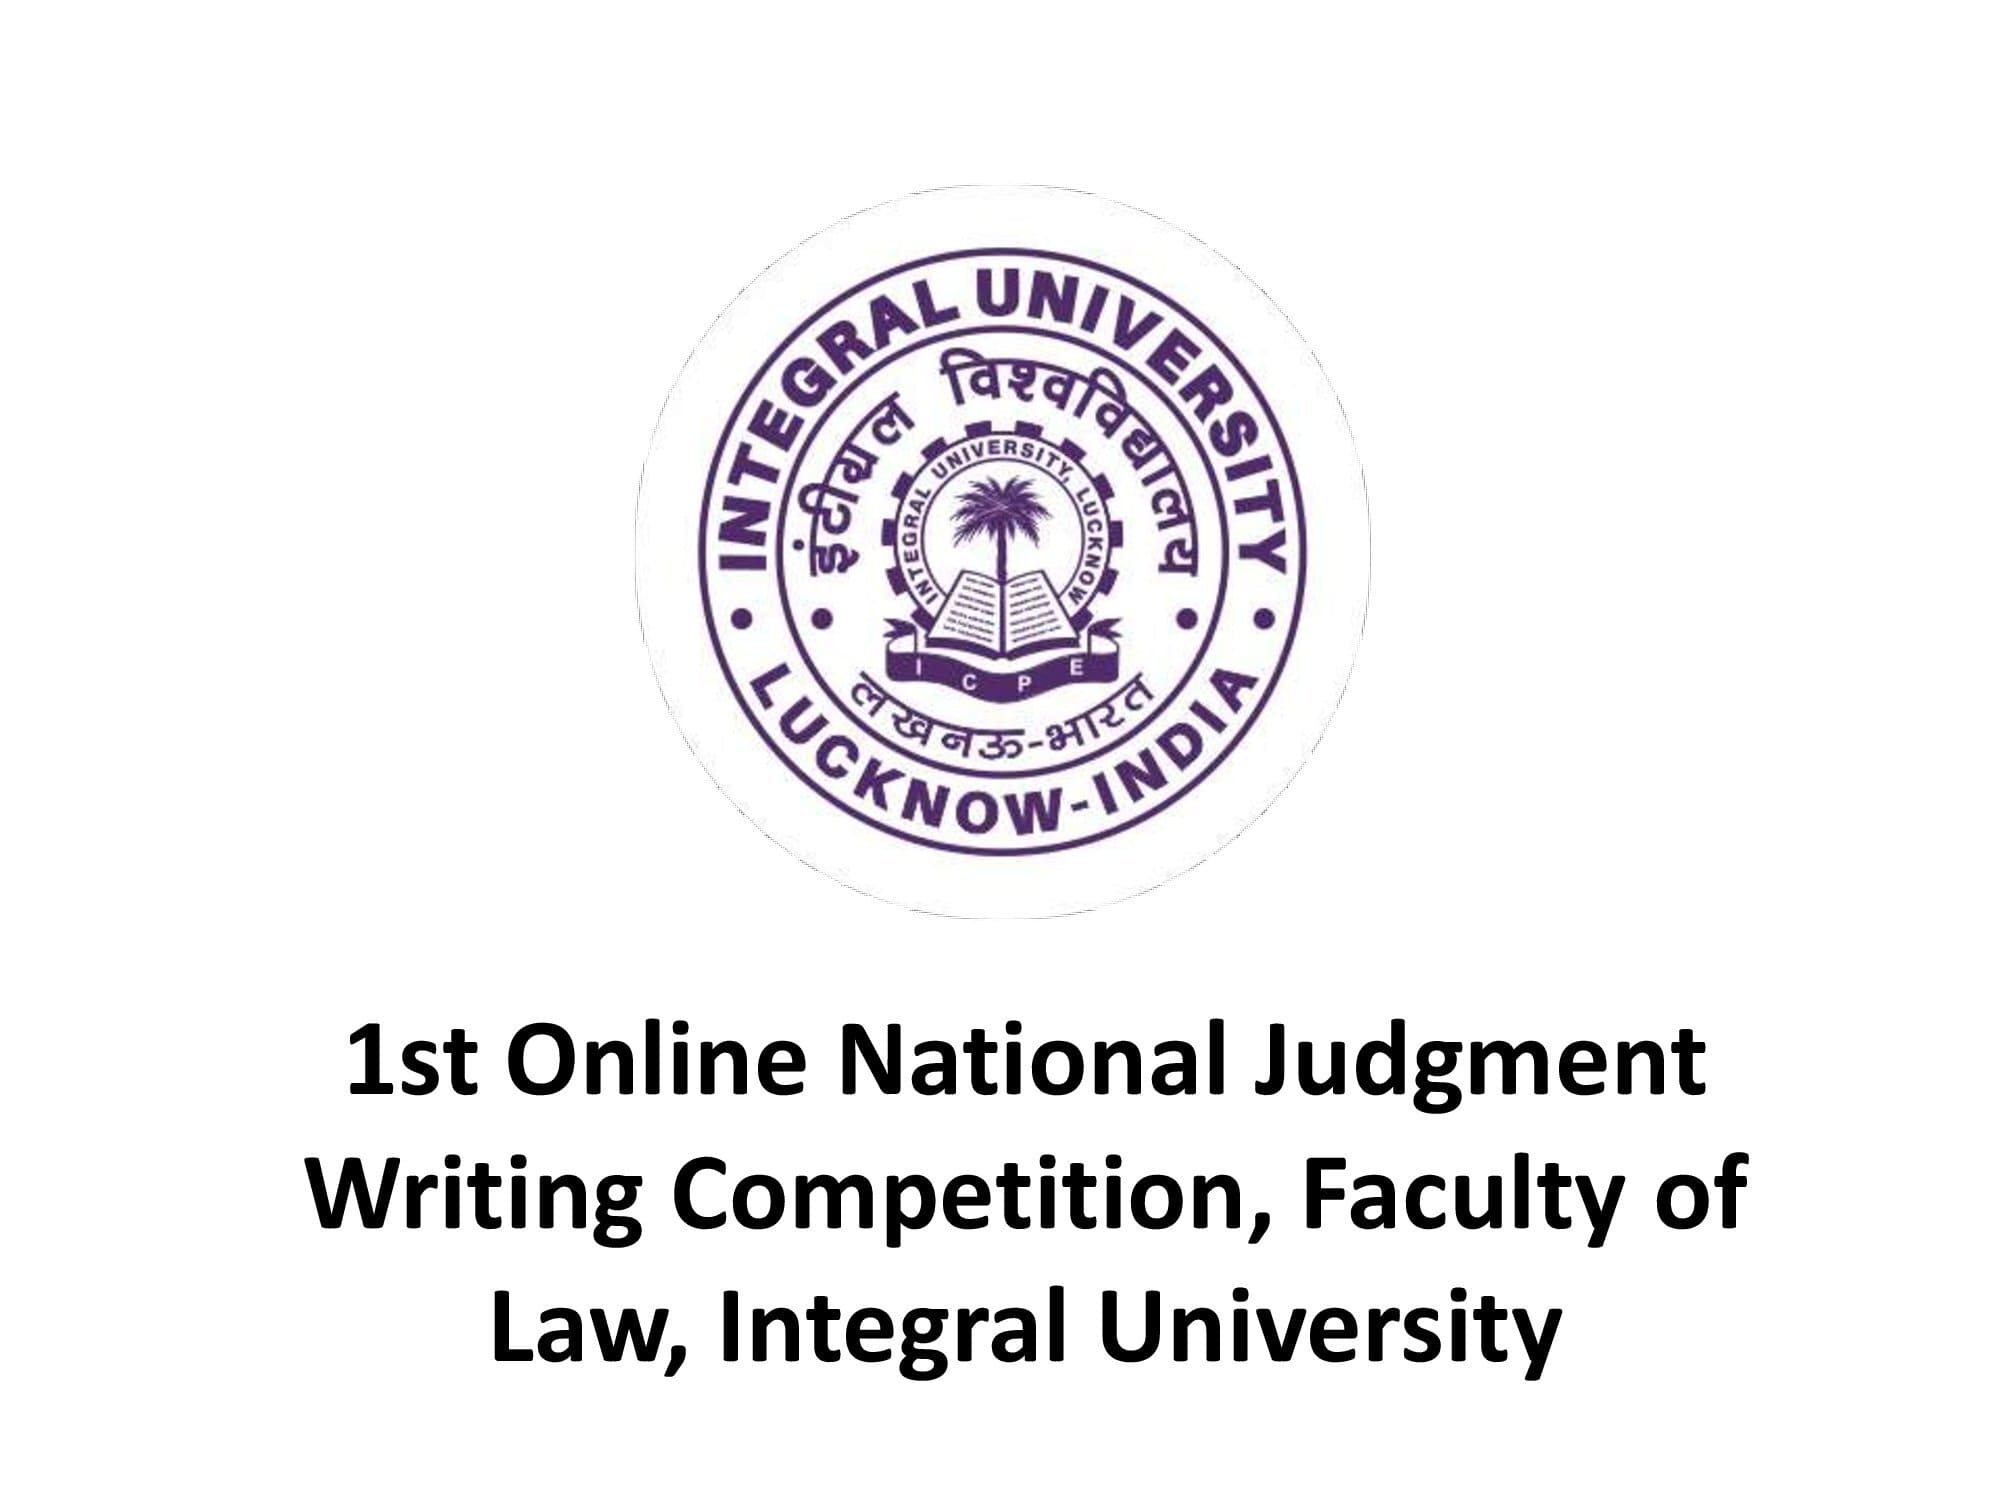 National Judgment Writing Competition